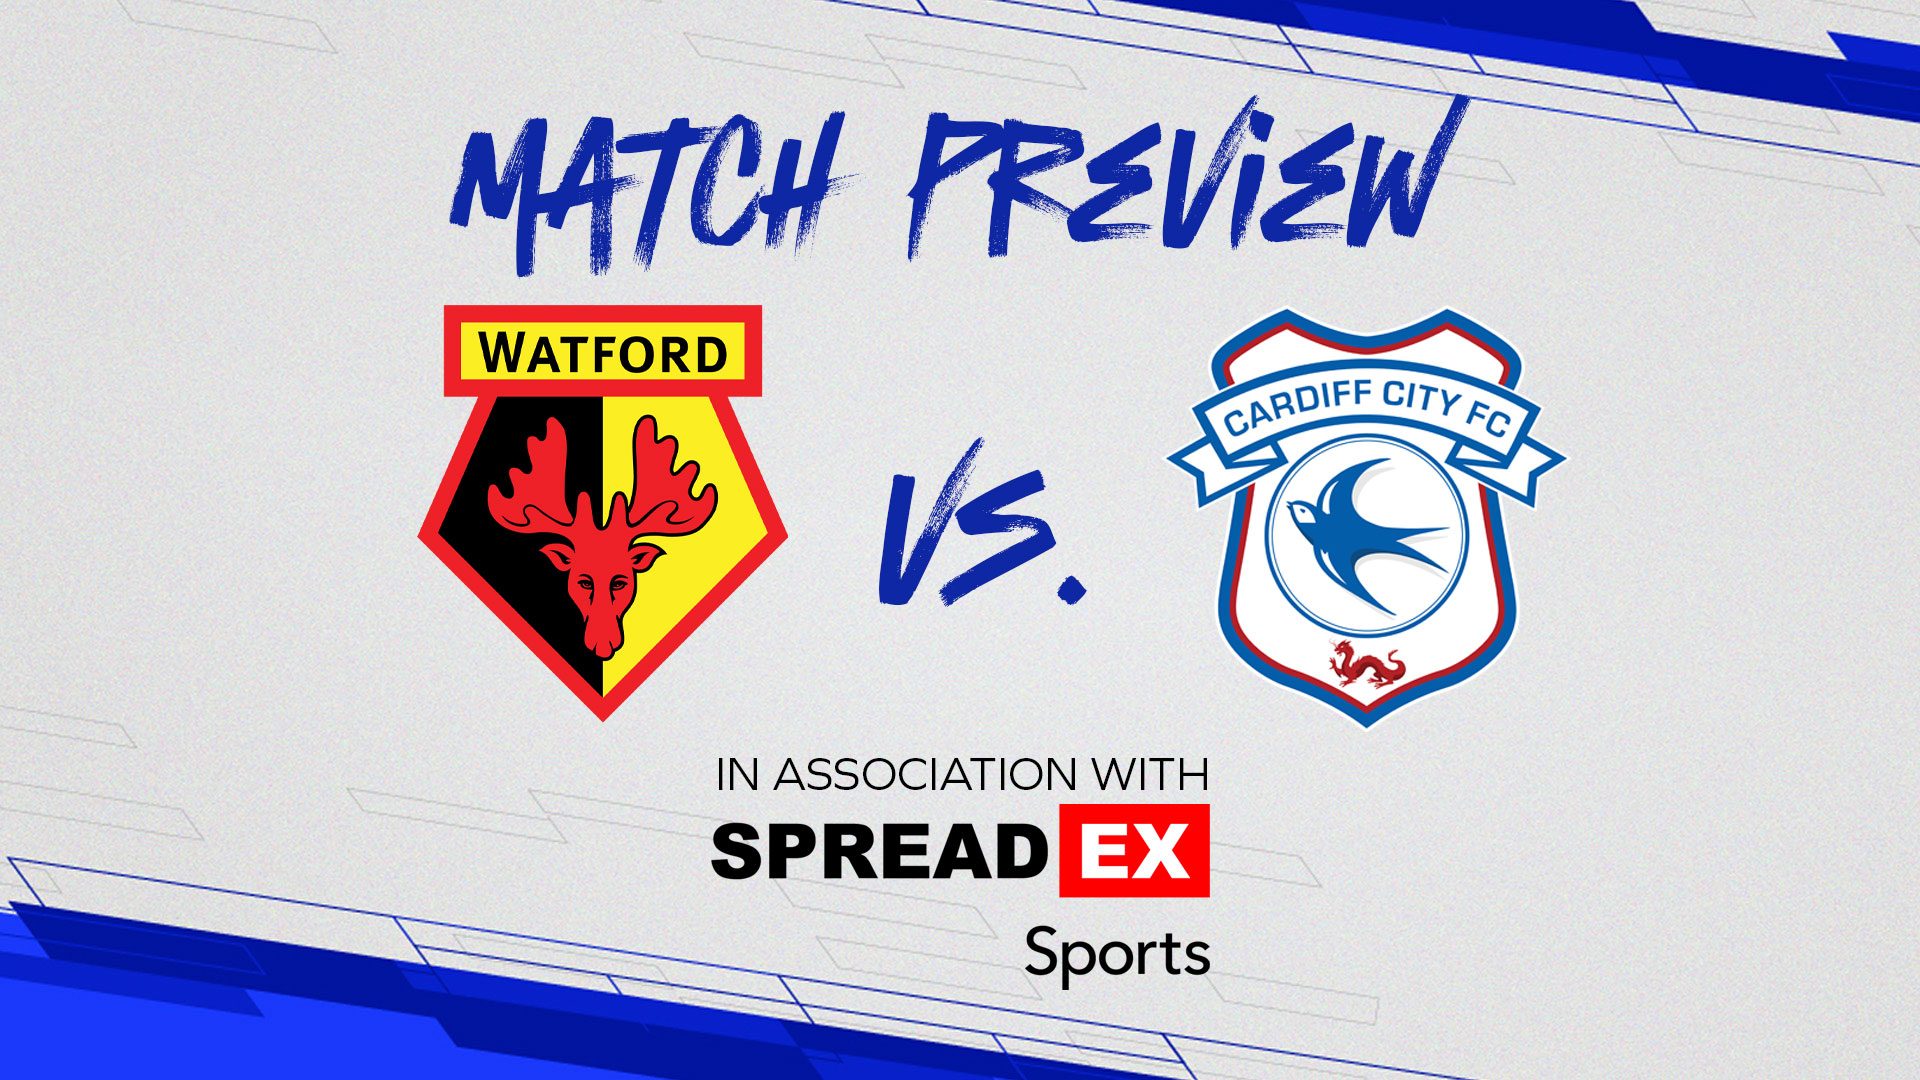 Match Preview: Watford vs. Cardiff City